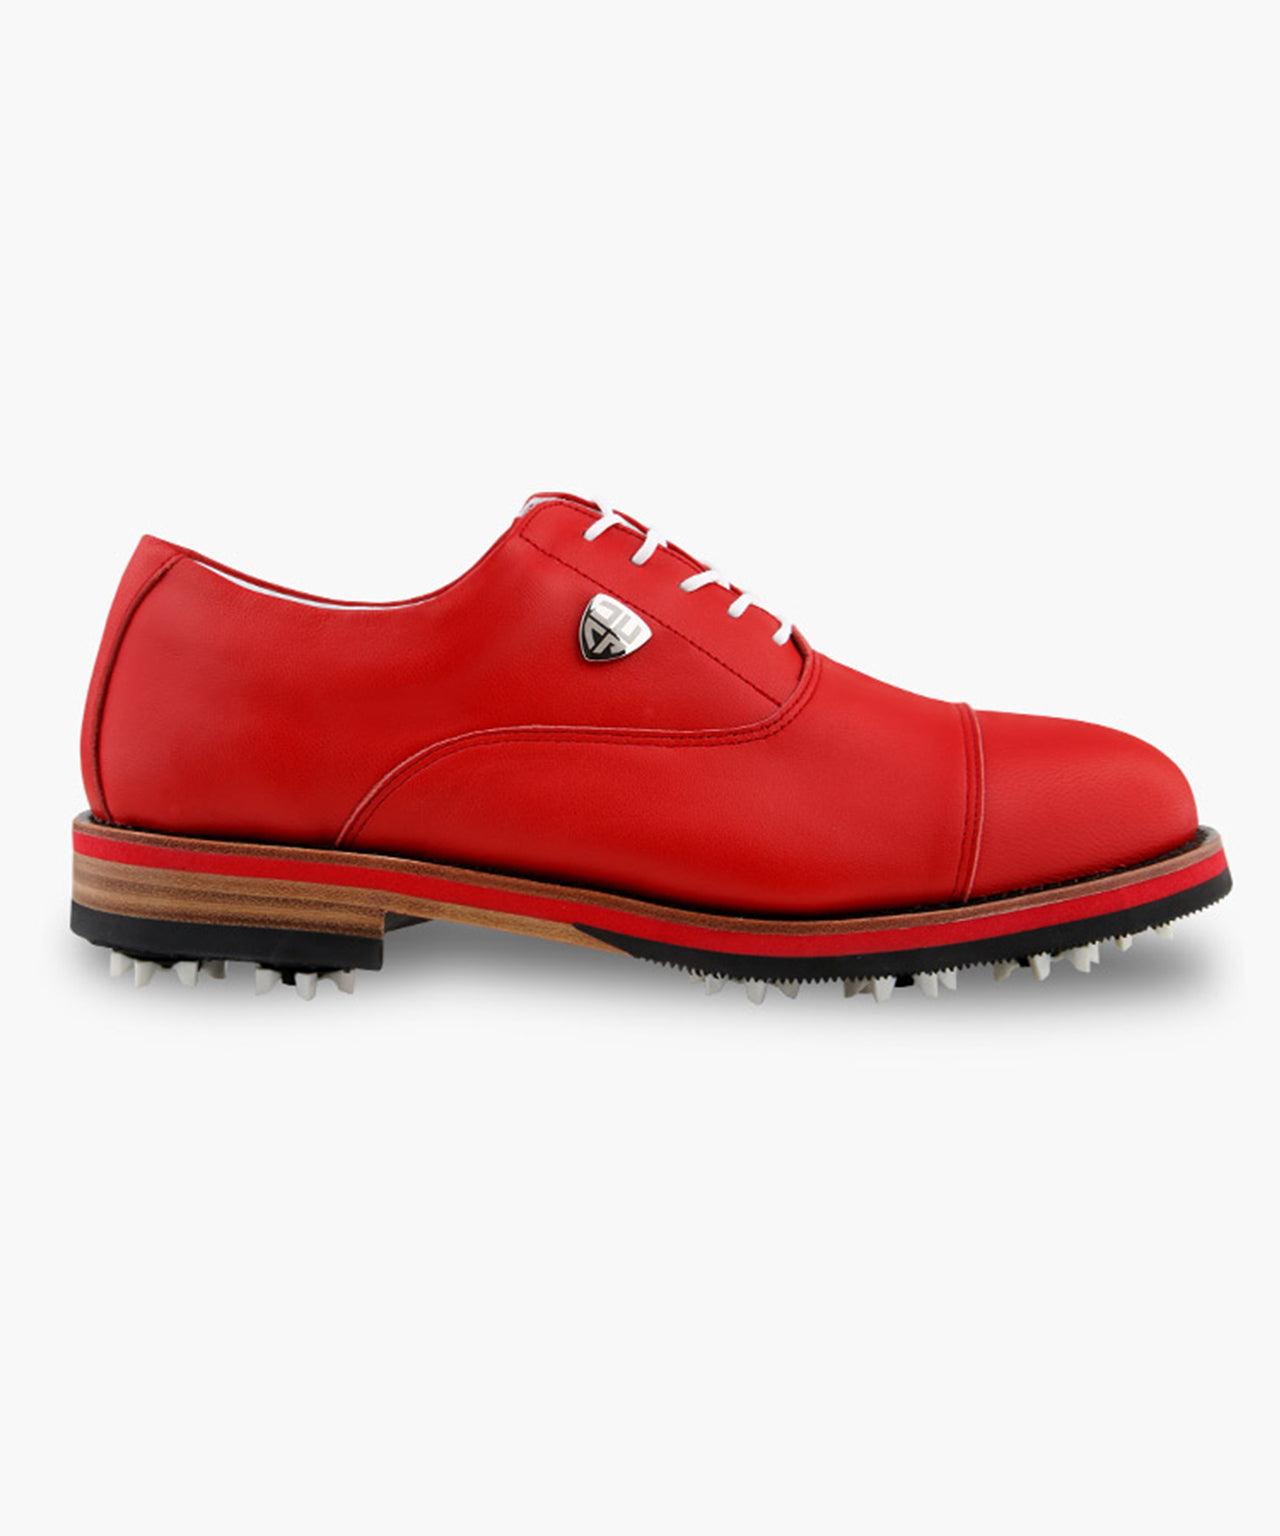 HENRY STUART Icon Classic Spike Golf Shoes - Red